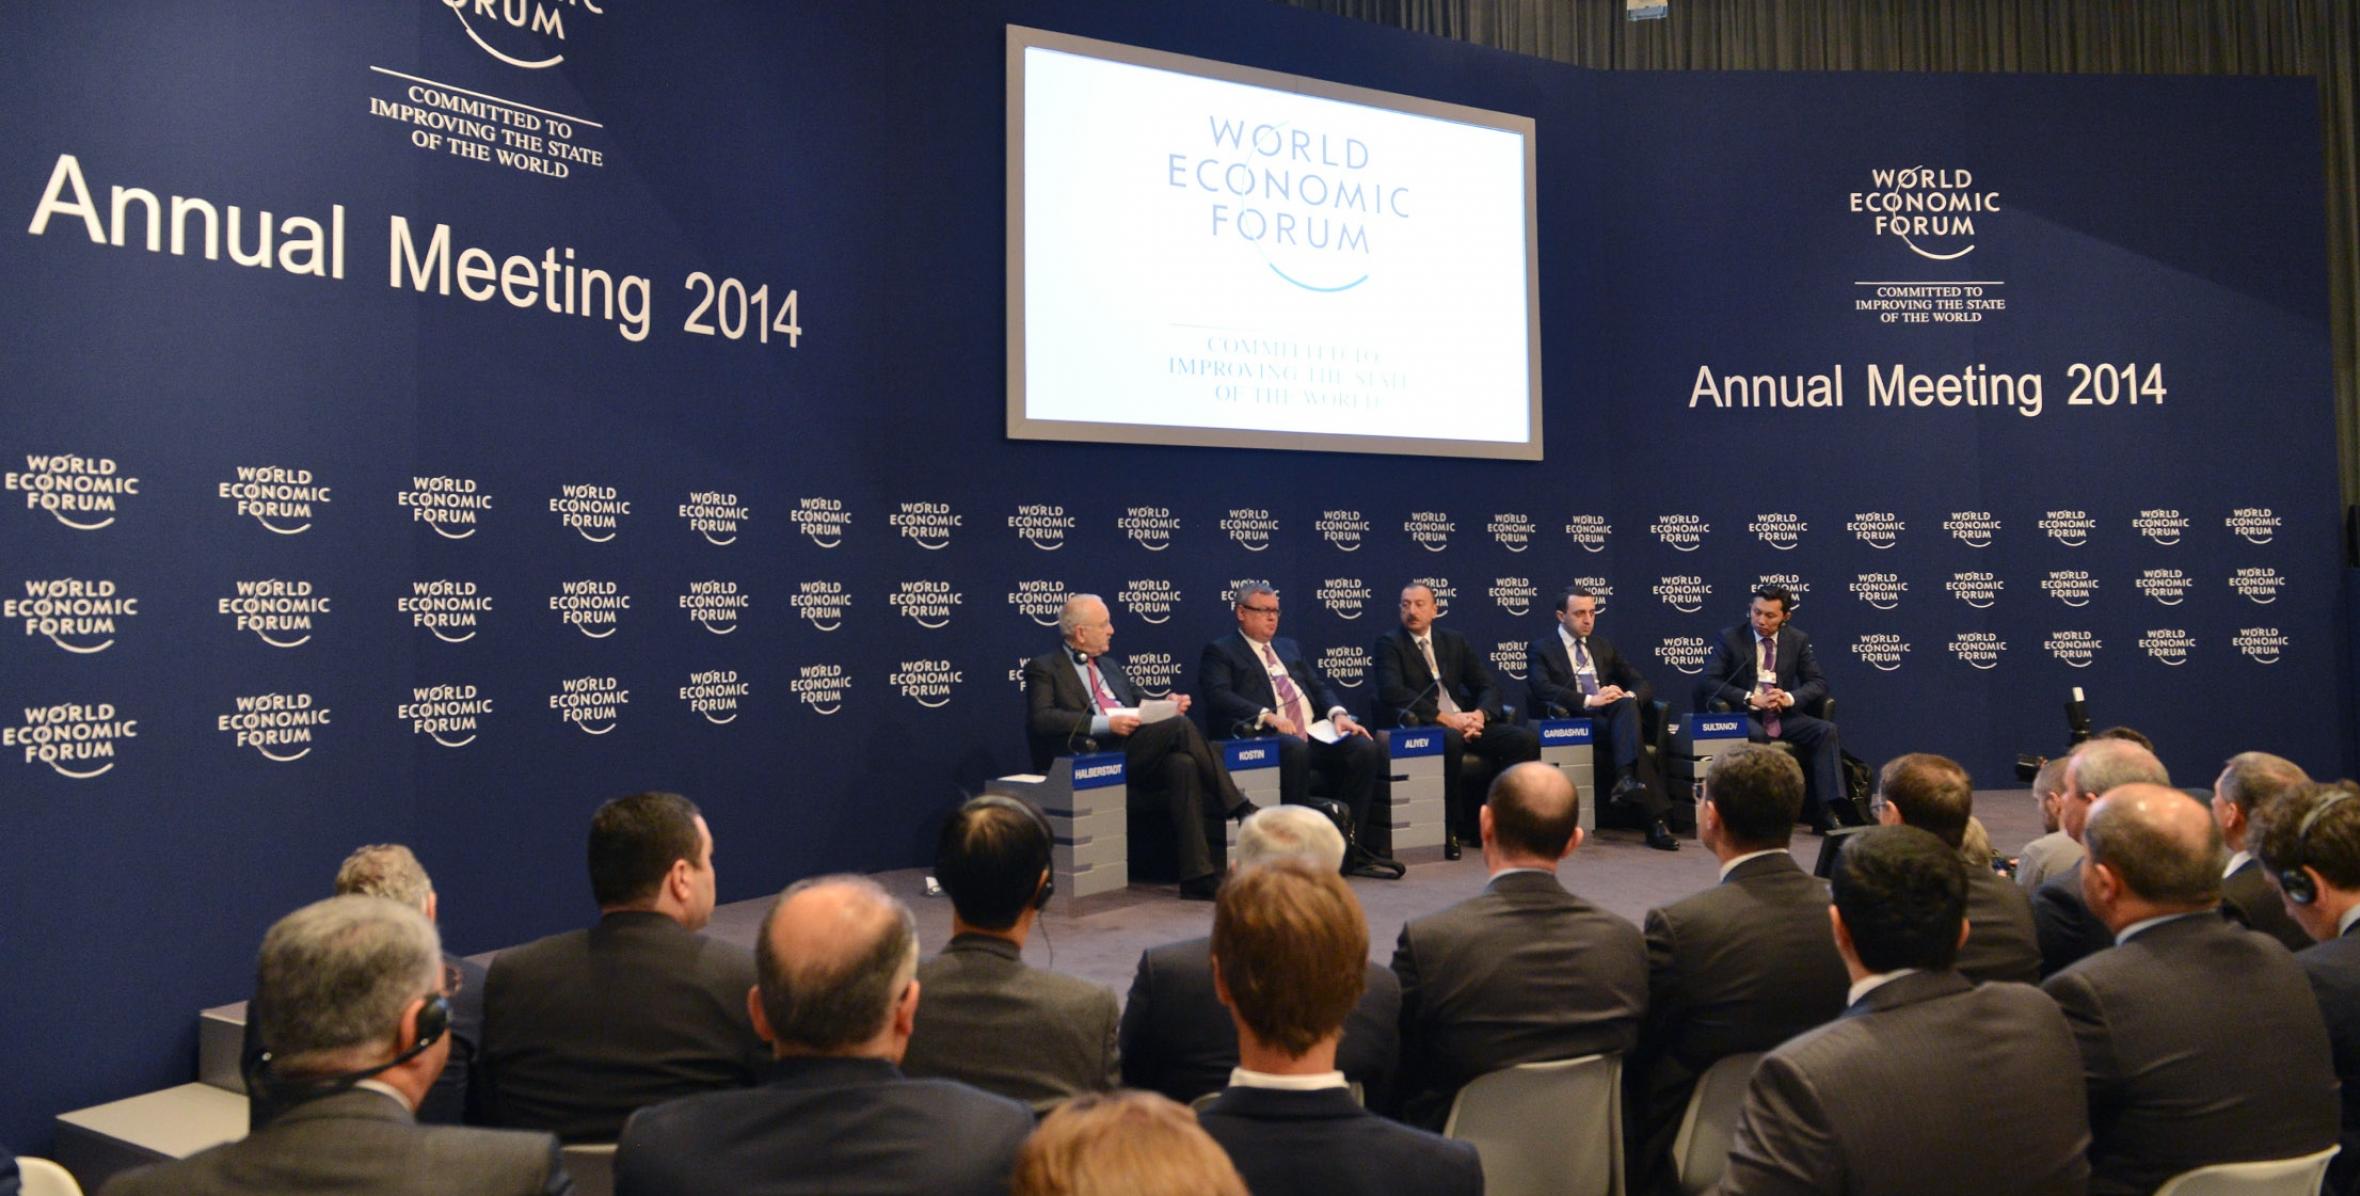 Ilham Aliyev attended the “Eurasia: The Next Frontier?” session of the World Economic Forum in Davos